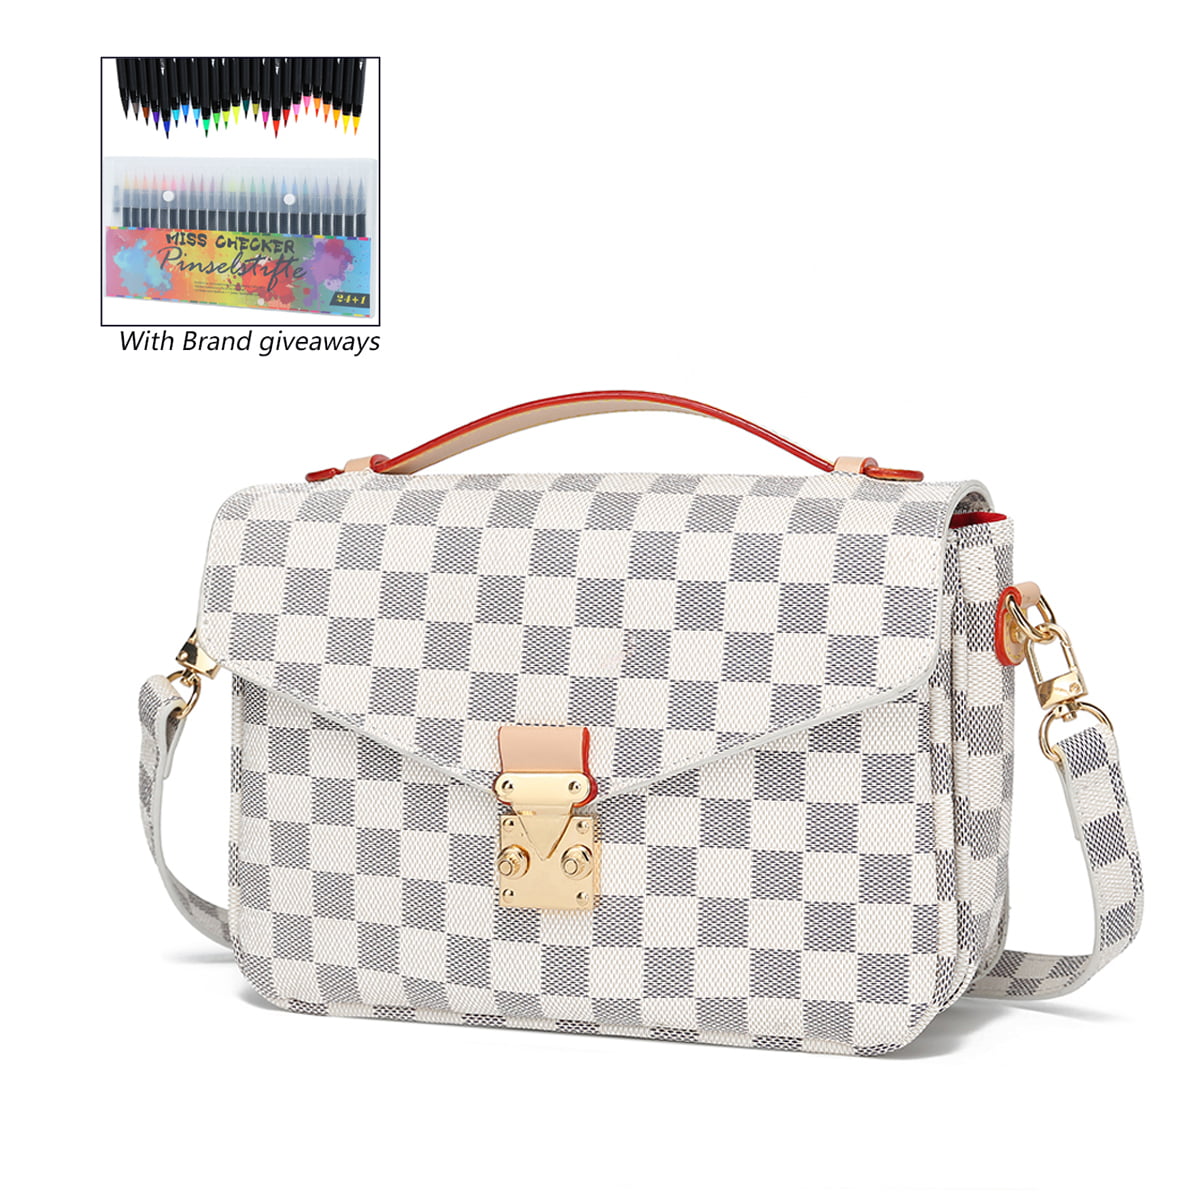 Womens White Checkered Tote Shoulder Bag Purse With Inner Pouch - PU Vegan  Leather Shoulder Satchel Fashion Bags, (16.5 X 6.3 X 11) 